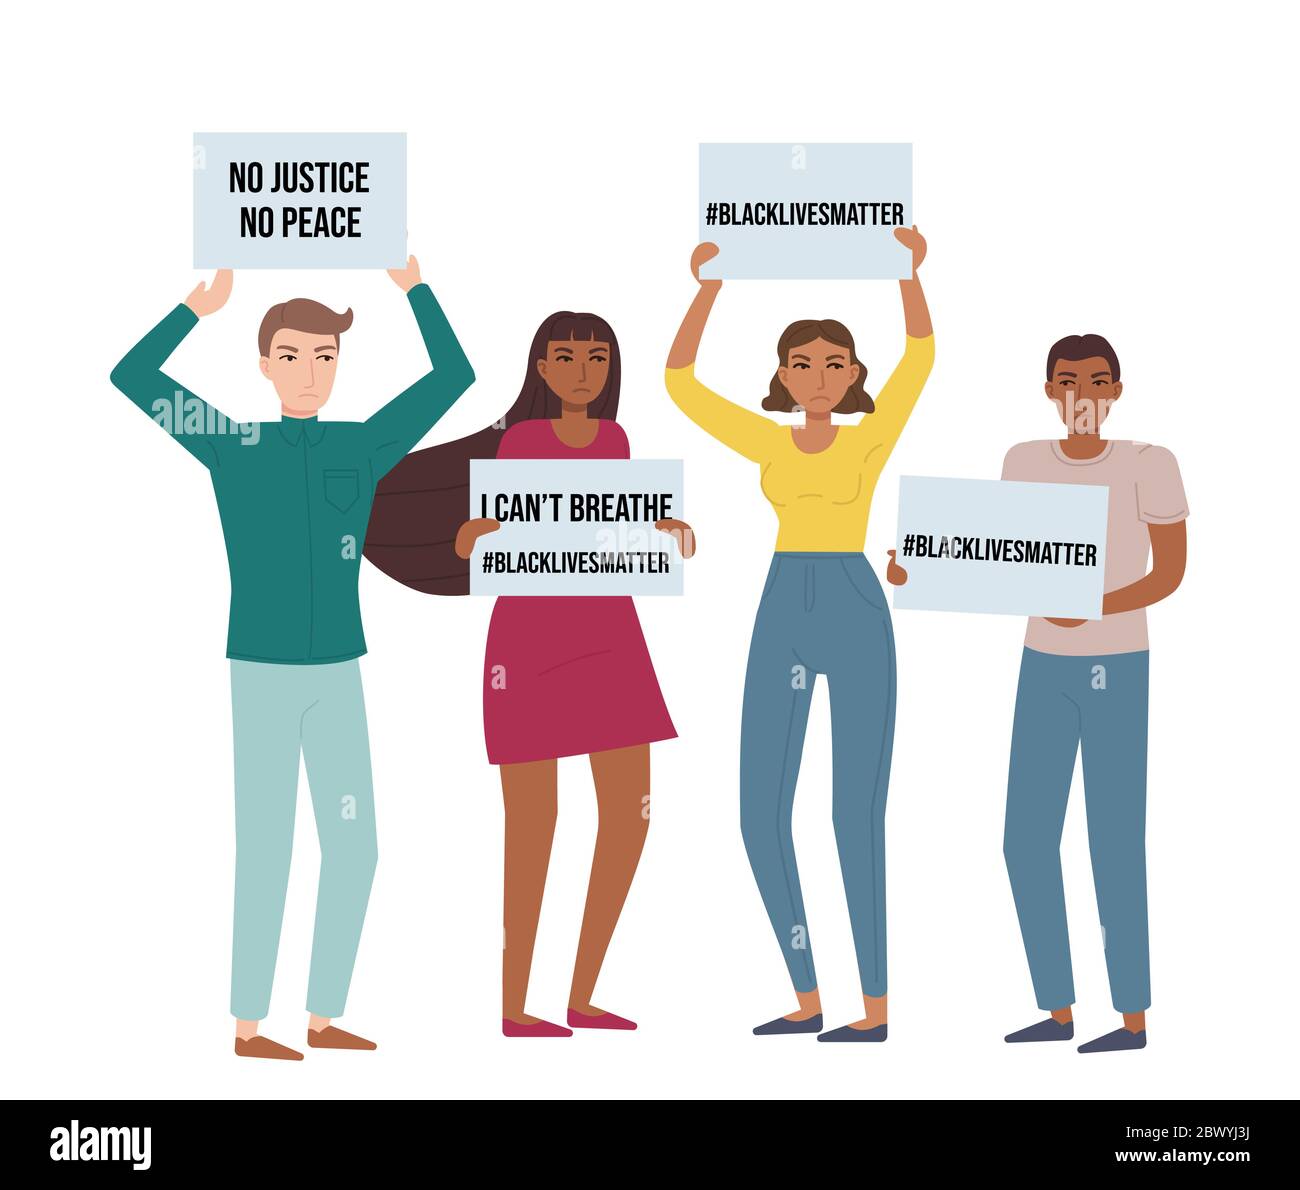 Crowd protest with posters against violence. Black lives matters, anti-racism demonstration, miting, activism, concept. Stock vector illustration in Stock Vector